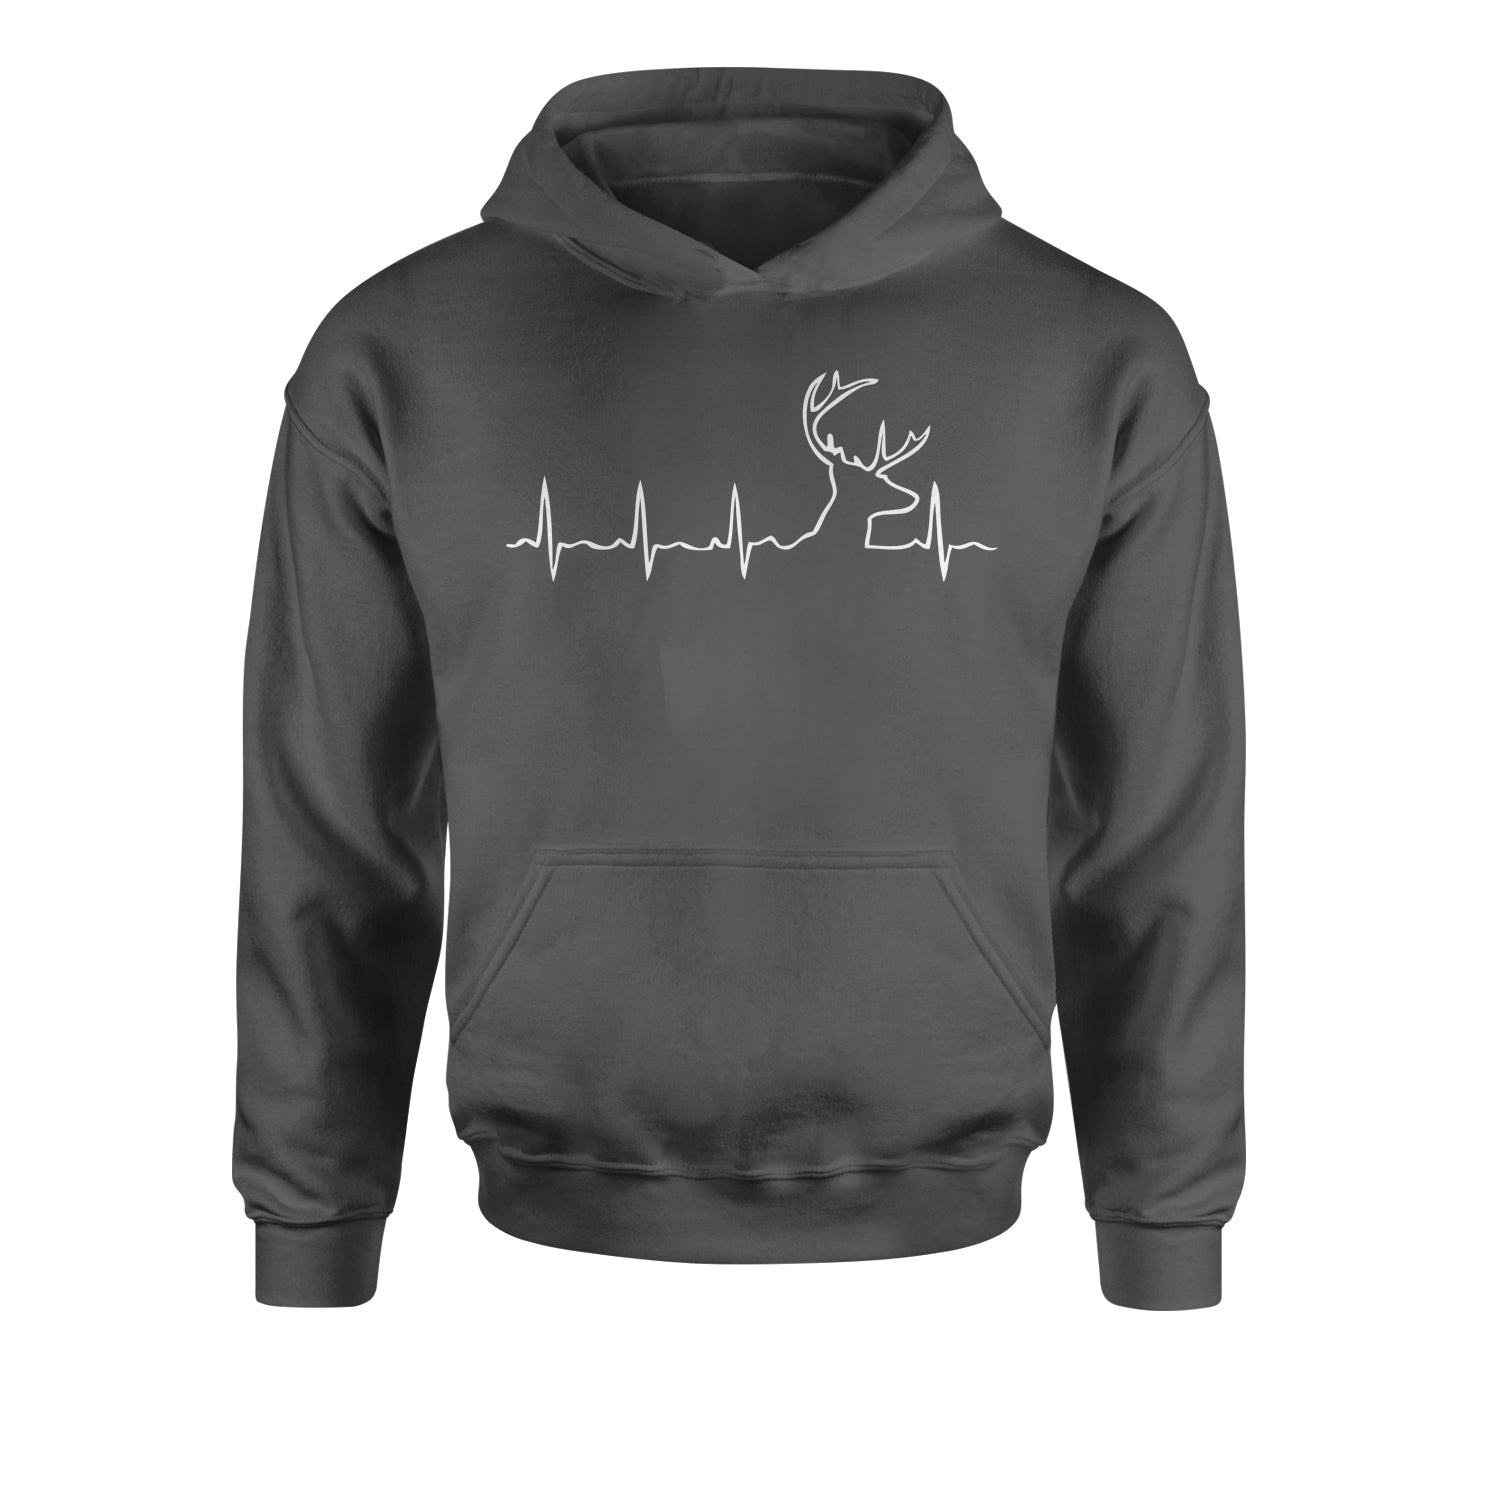 Hunting Heartbeat Dear Head Youth-Sized Hoodie #expressiontees by Expression Tees